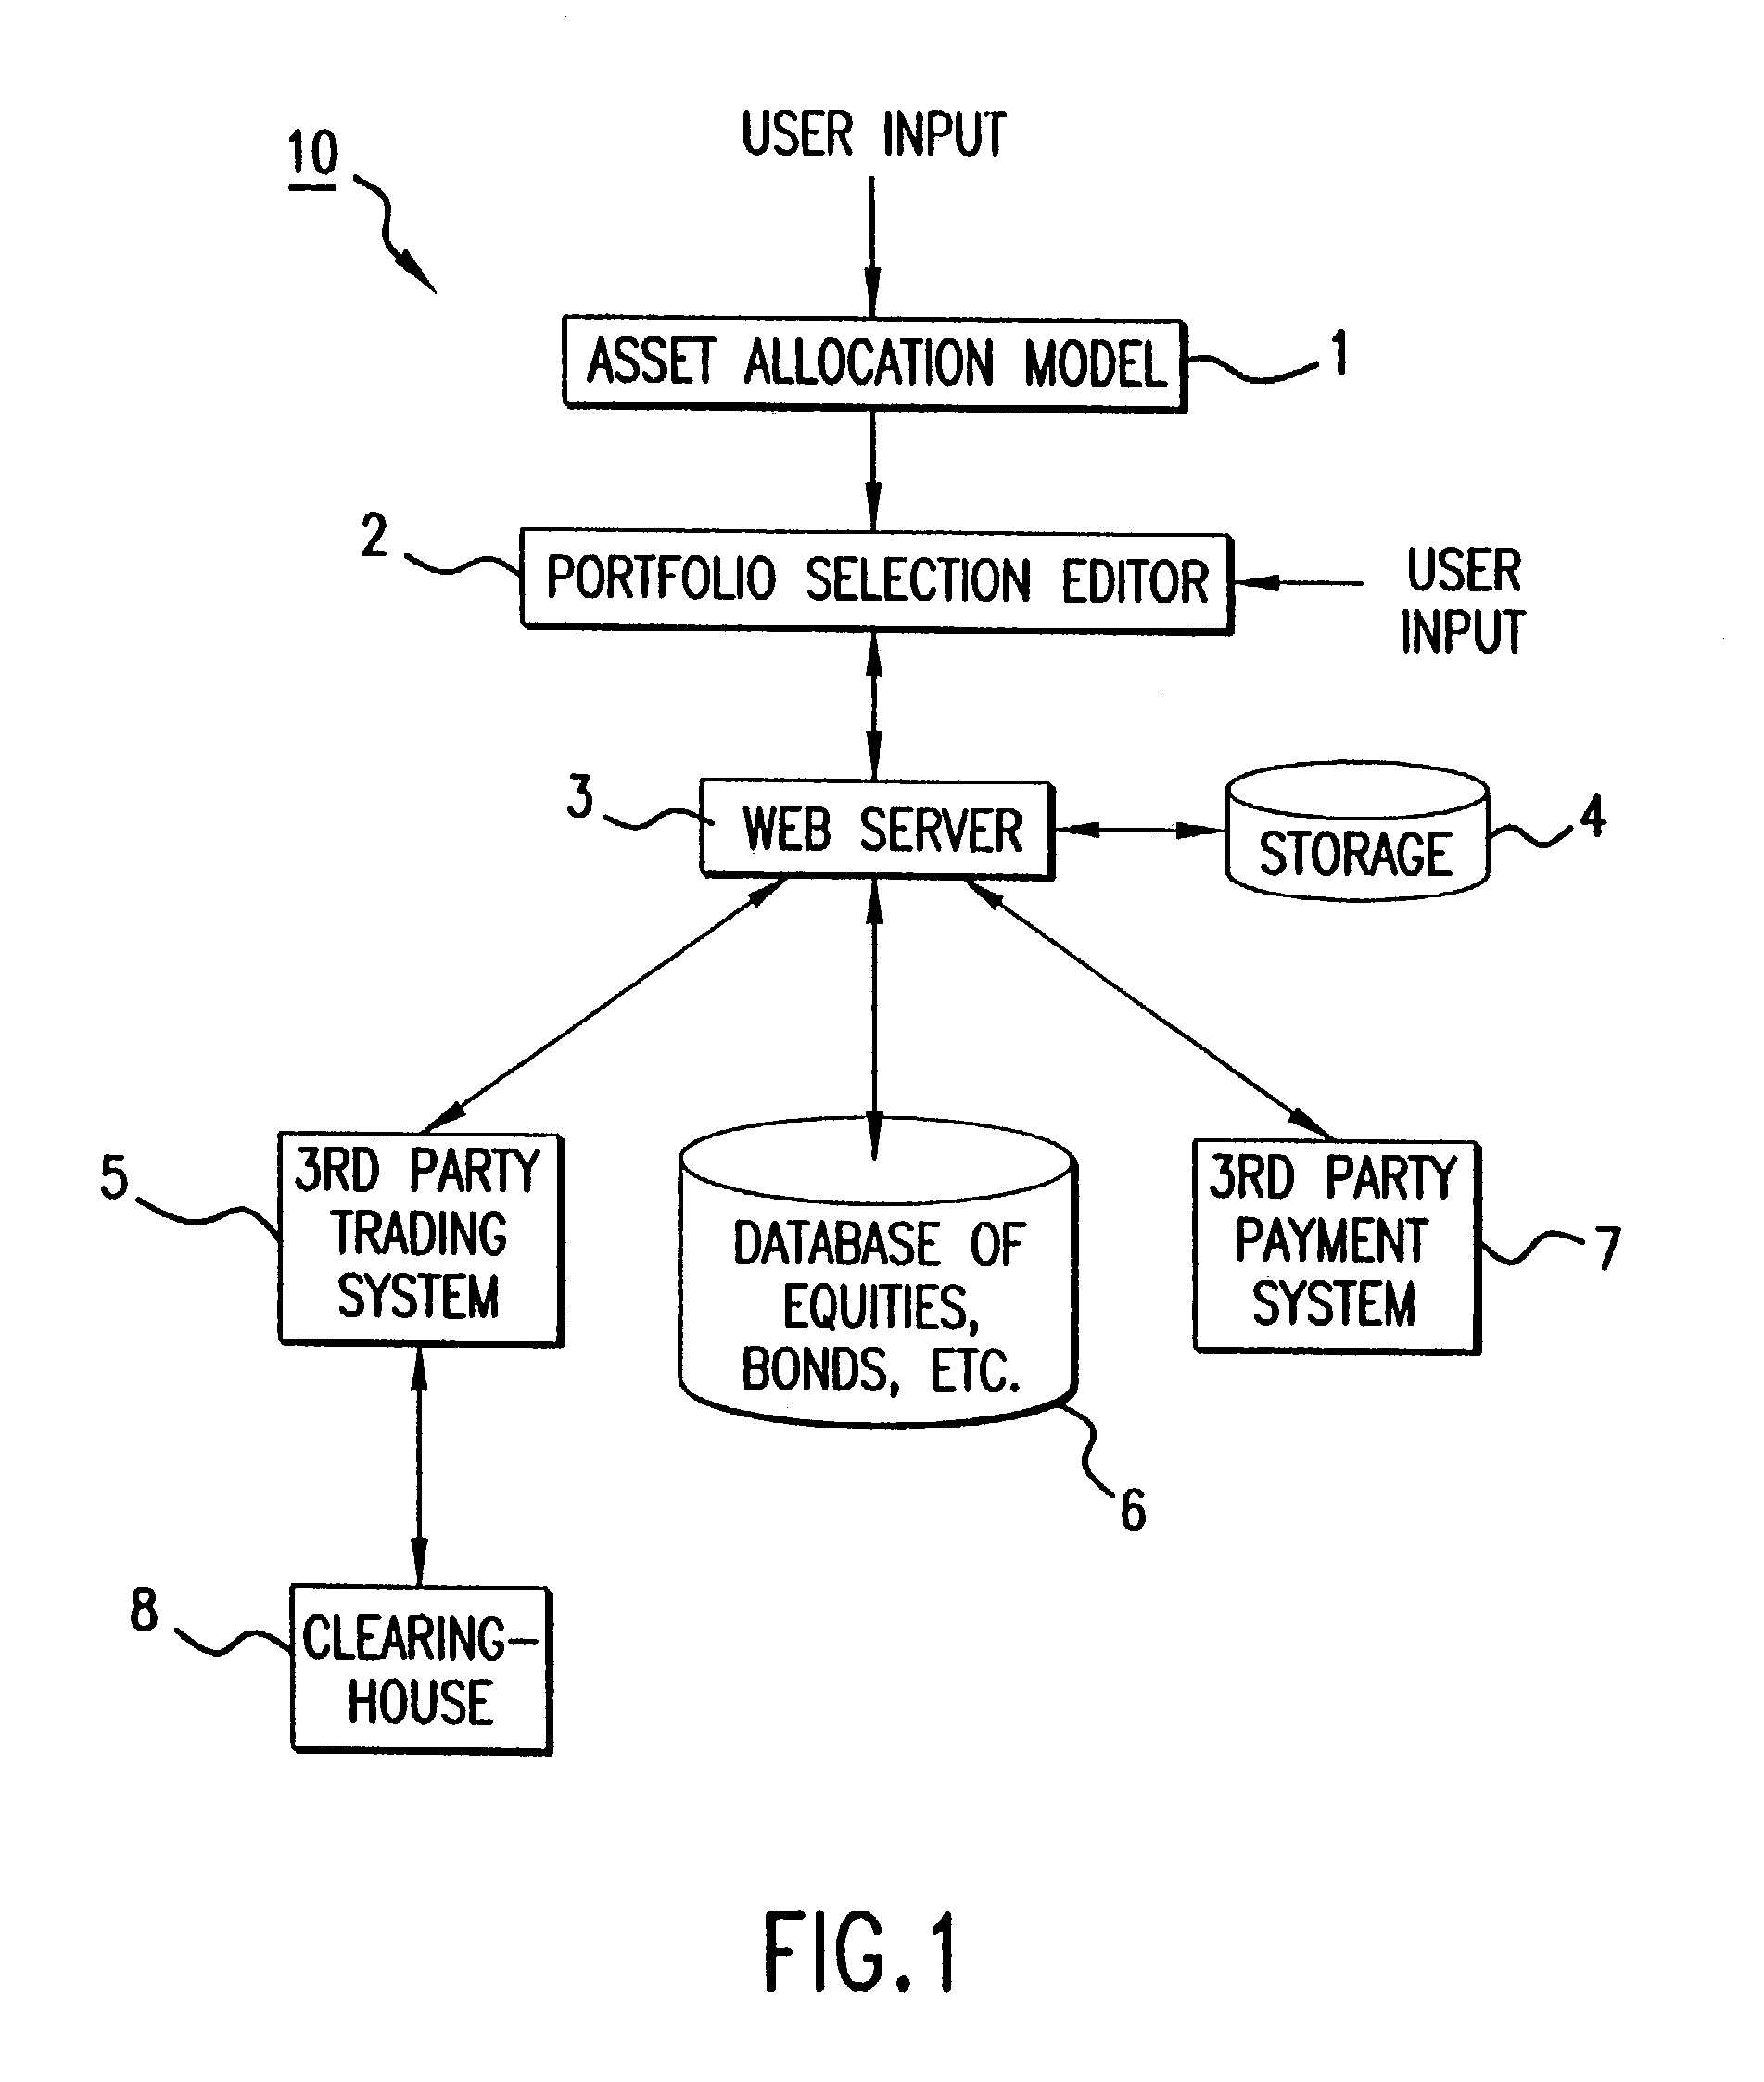 Method and apparatus for enabling individual or smaller investors or others to create and manage a portfolio of securities or other assets or liabilities on a cost effective basis